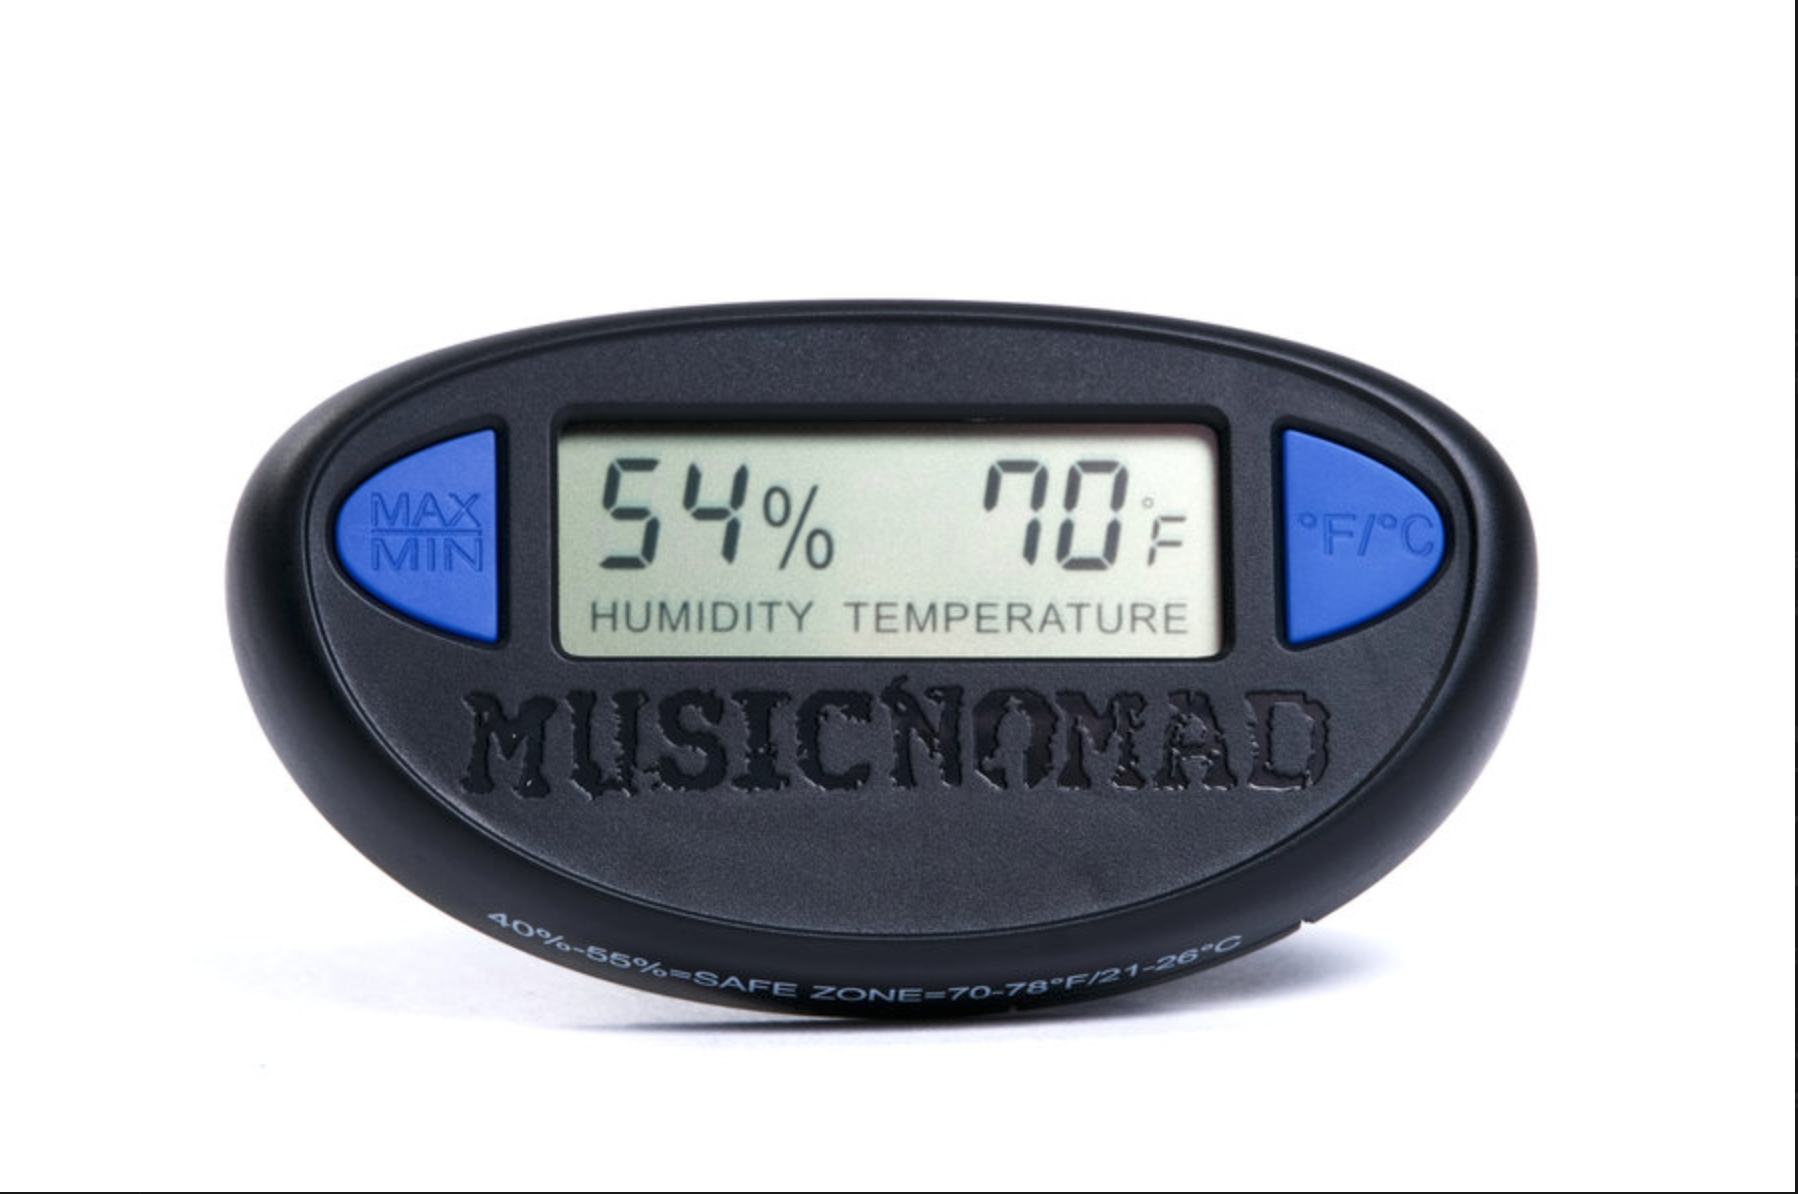 MusicNomad The Humitar ONE - Acoustic Guitar Humidifier & Hygrometer (MN311)